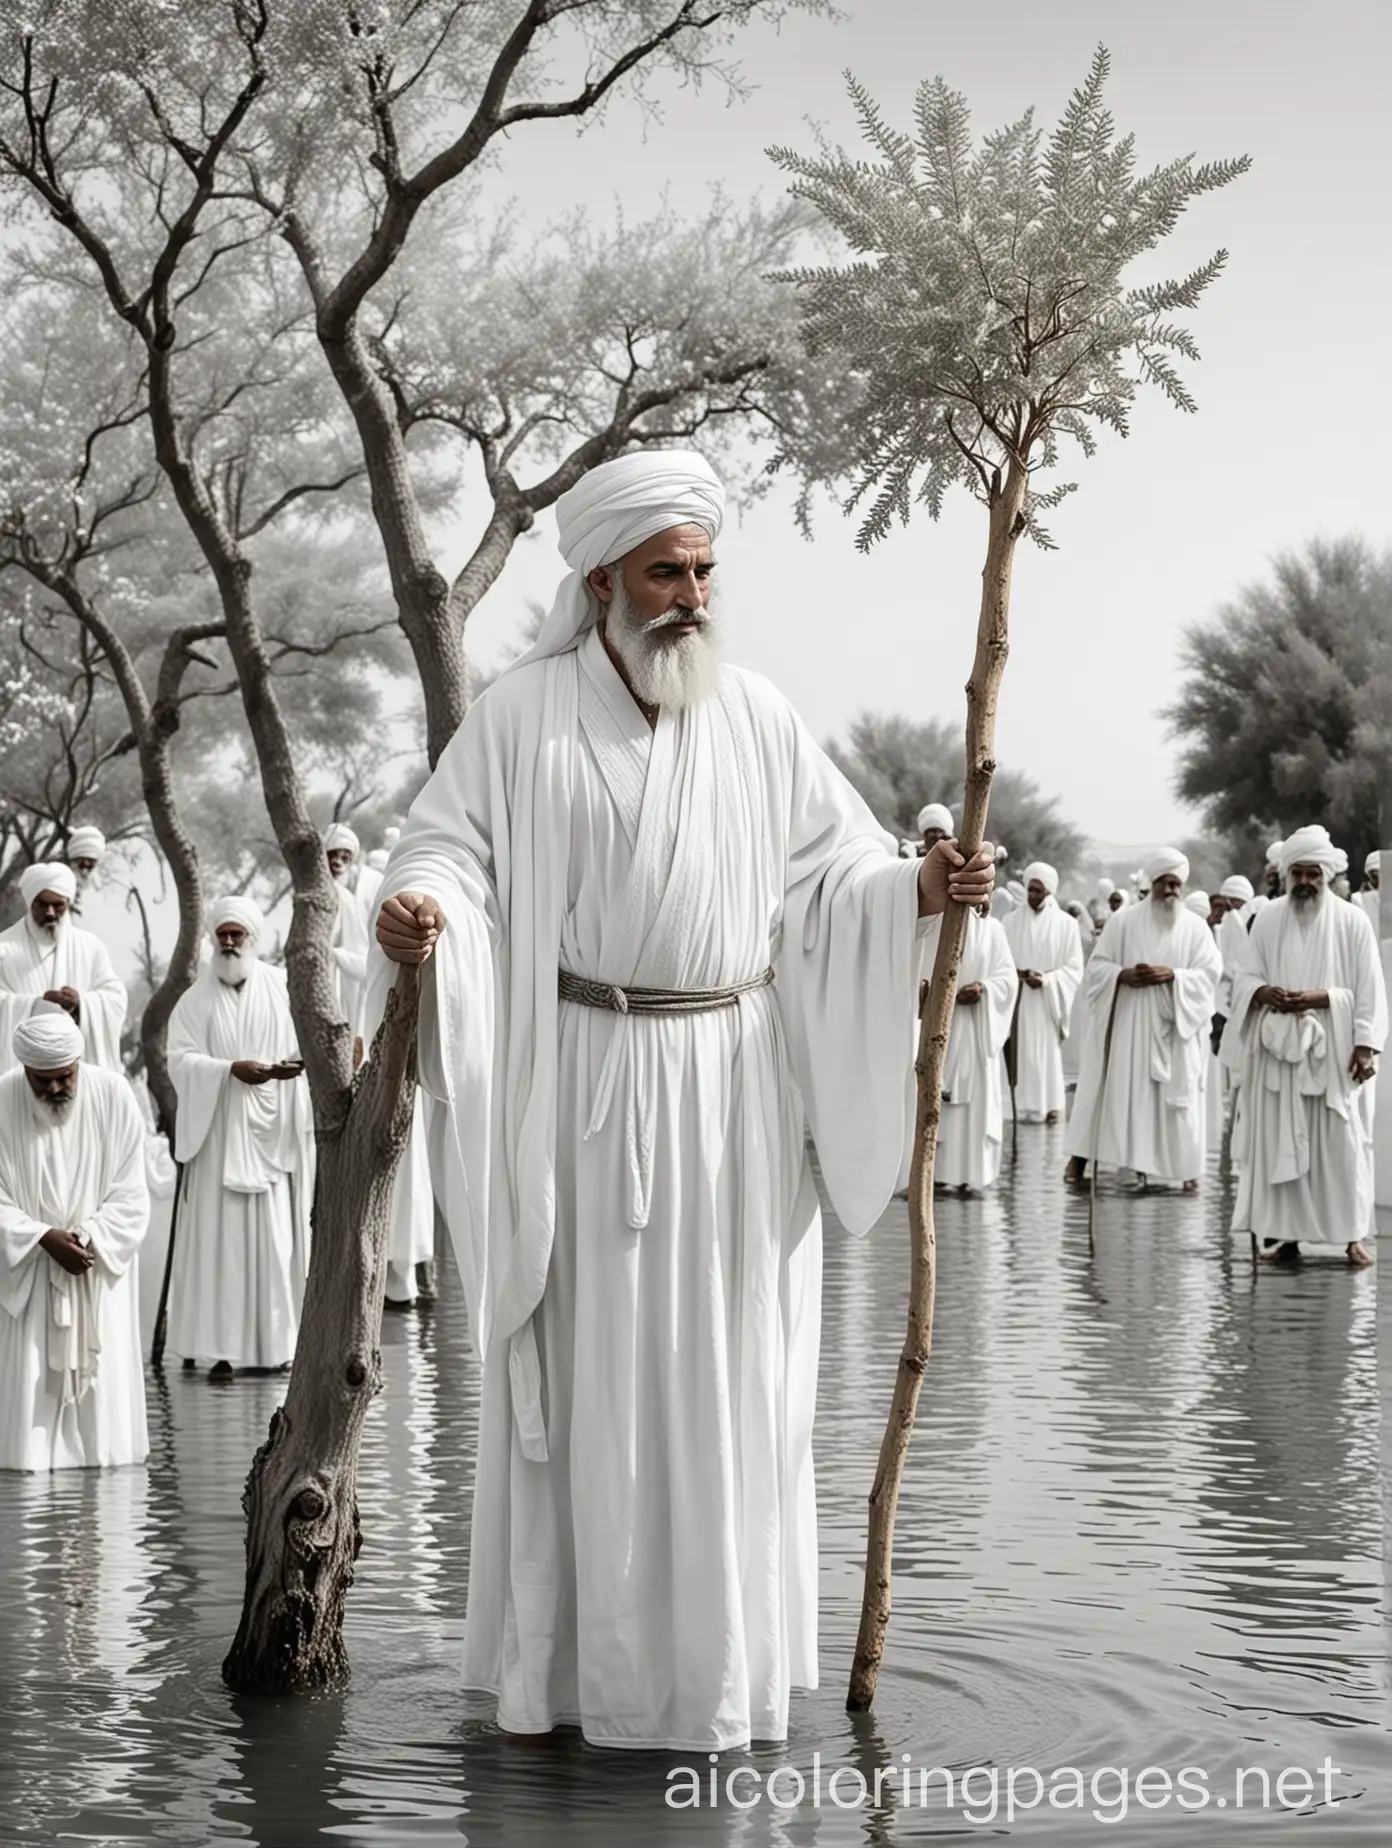 a religious middle east white man dressing white robe with woolly belt and white turban and white beard holding a tree stick standing in the water surrounded by  majestic people dressing white robs with woolly belts and white turbans coming out of heaven, sharp, Coloring Page, black and white, line art, white background, Simplicity, Ample White Space. The background of the coloring page is plain white to make it easy for young children to color within the lines. The outlines of all the subjects are easy to distinguish, making it simple for kids to color without too much difficulty